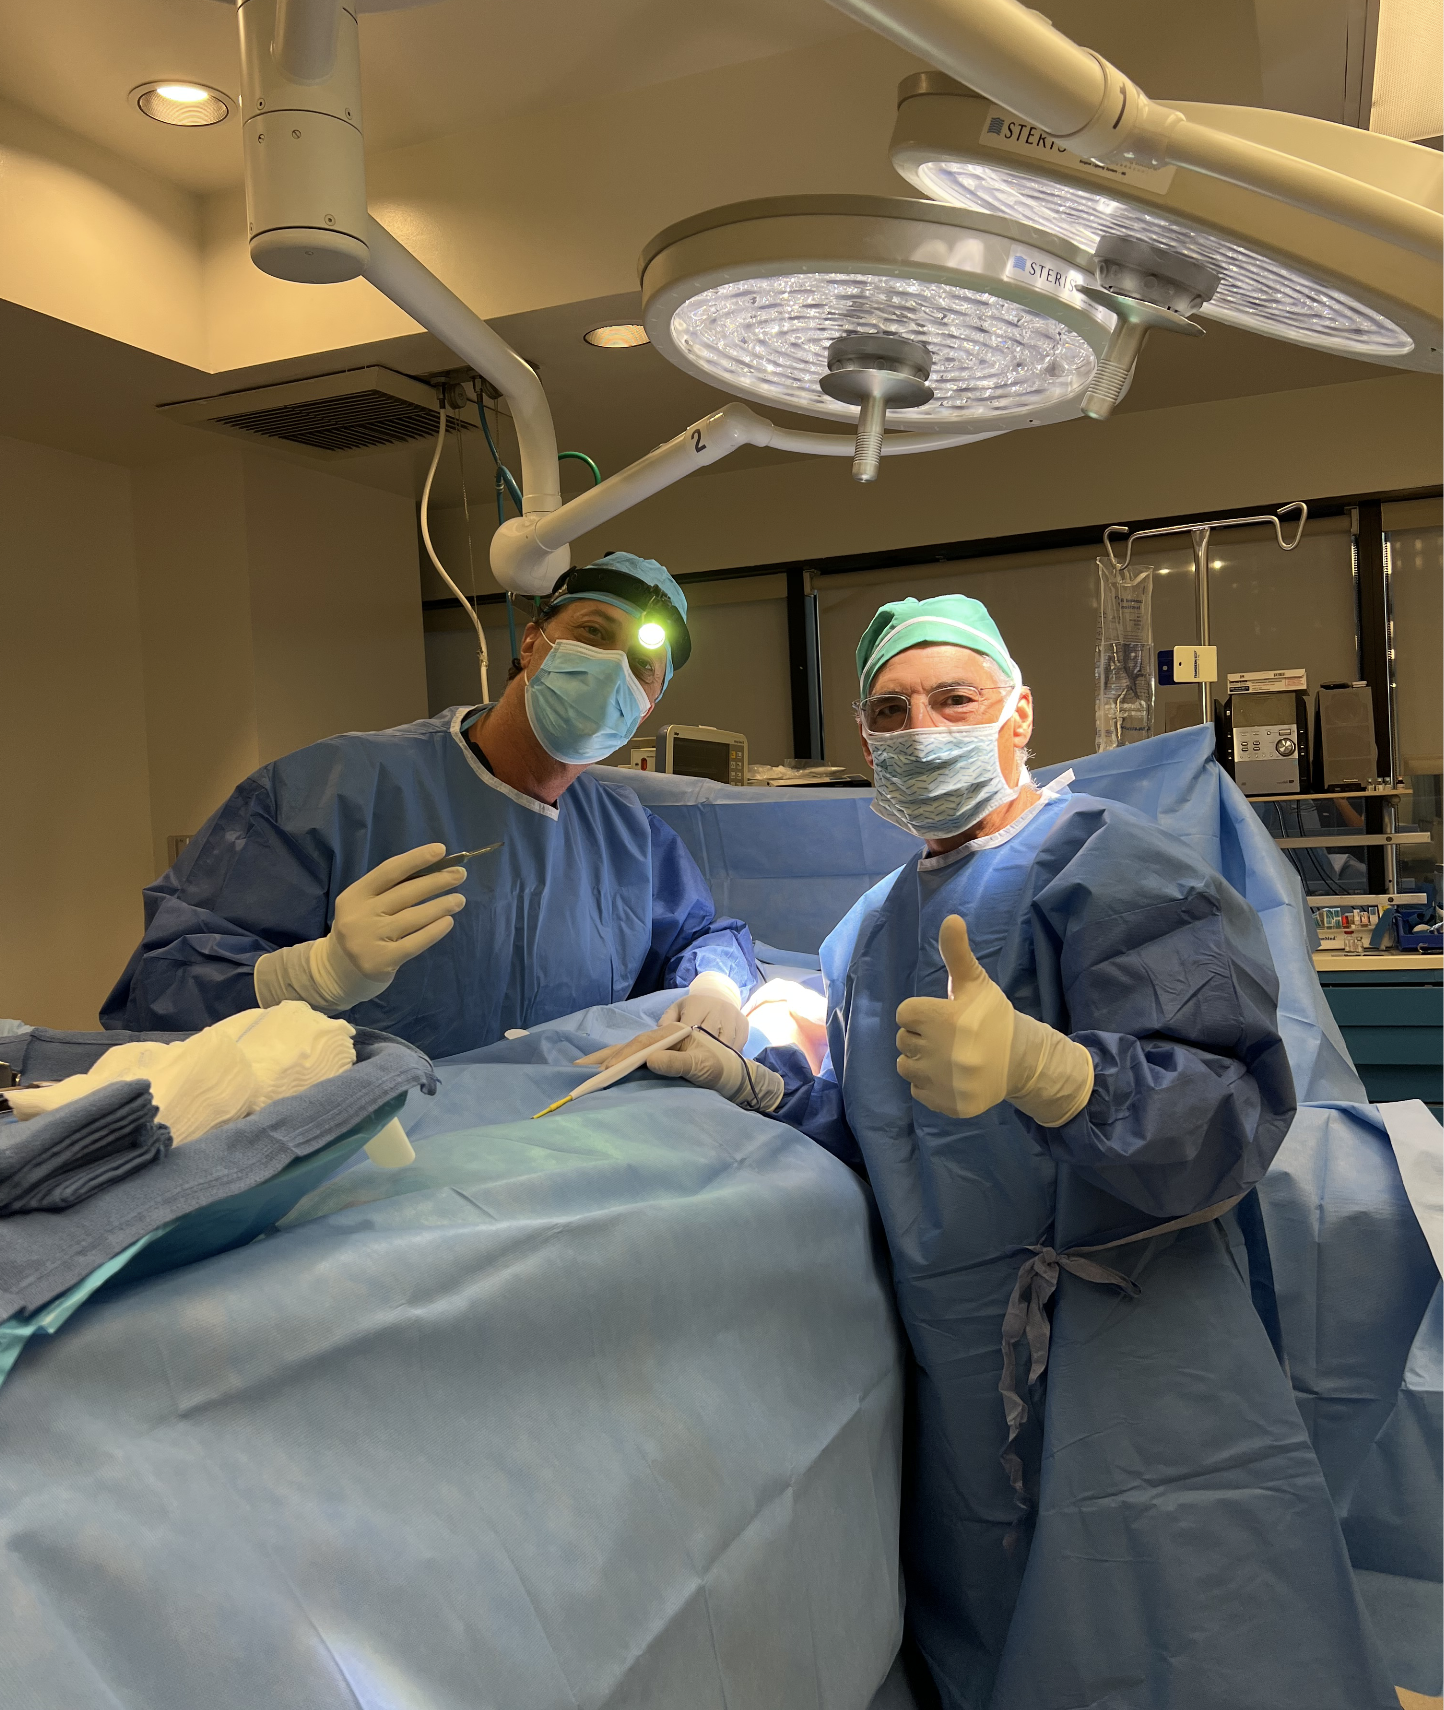 Dr. Linder and colleagues in operating room.